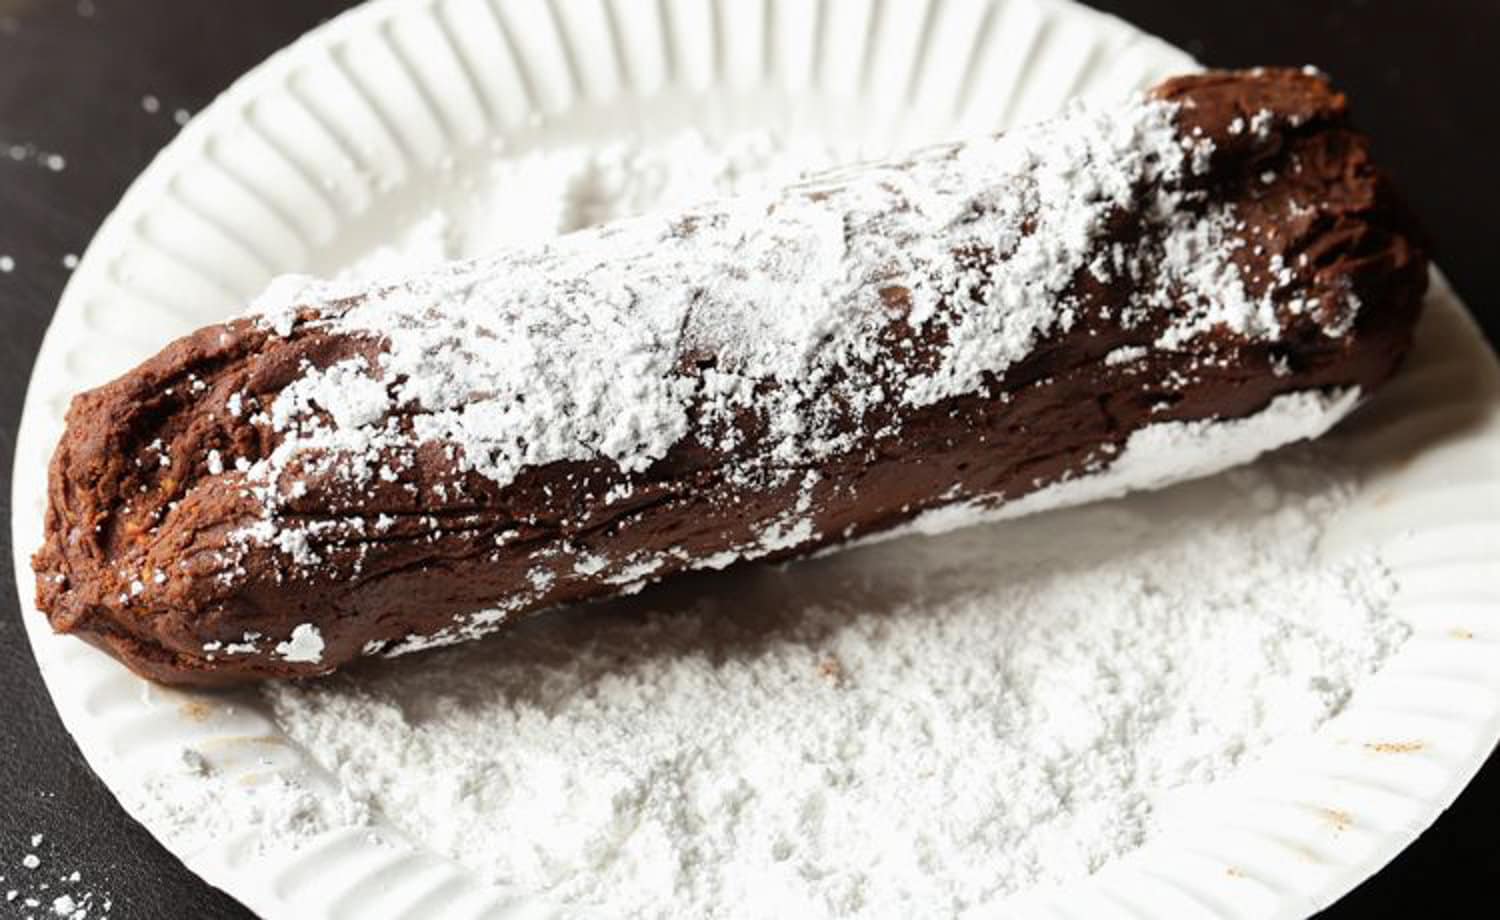 Chocolate Log topped with sugar